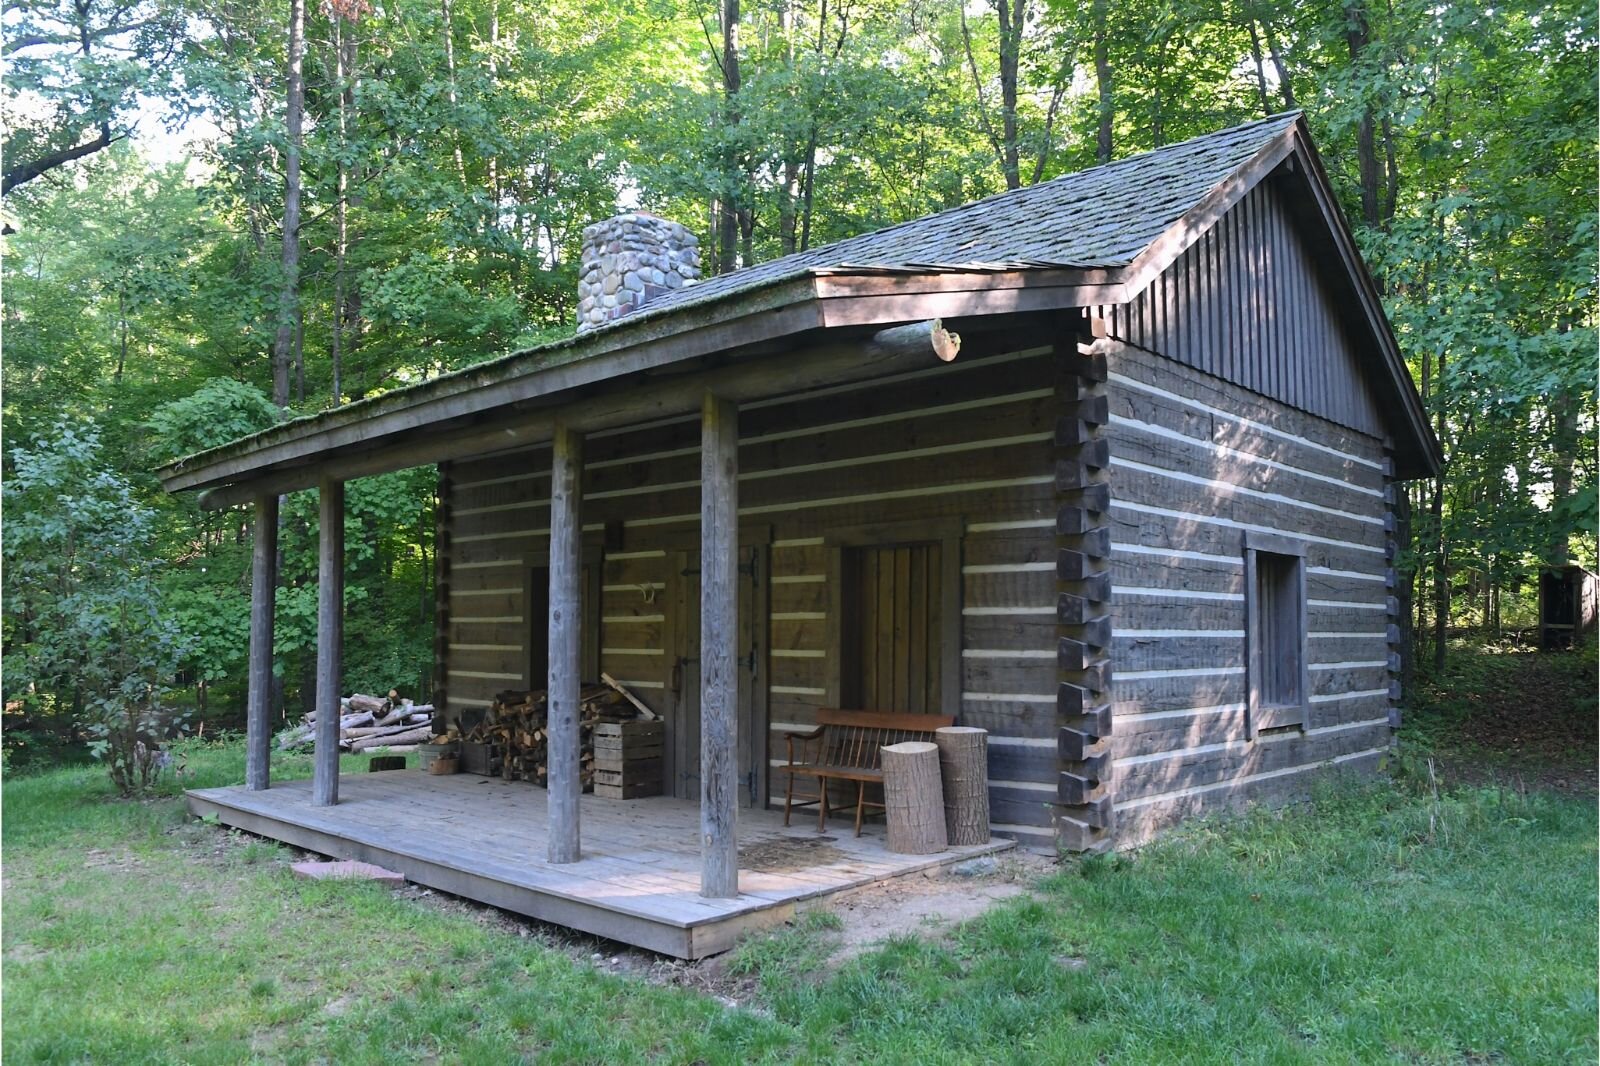 The Pioneer Cabin at the Battle Creek Outdoor Education Center.